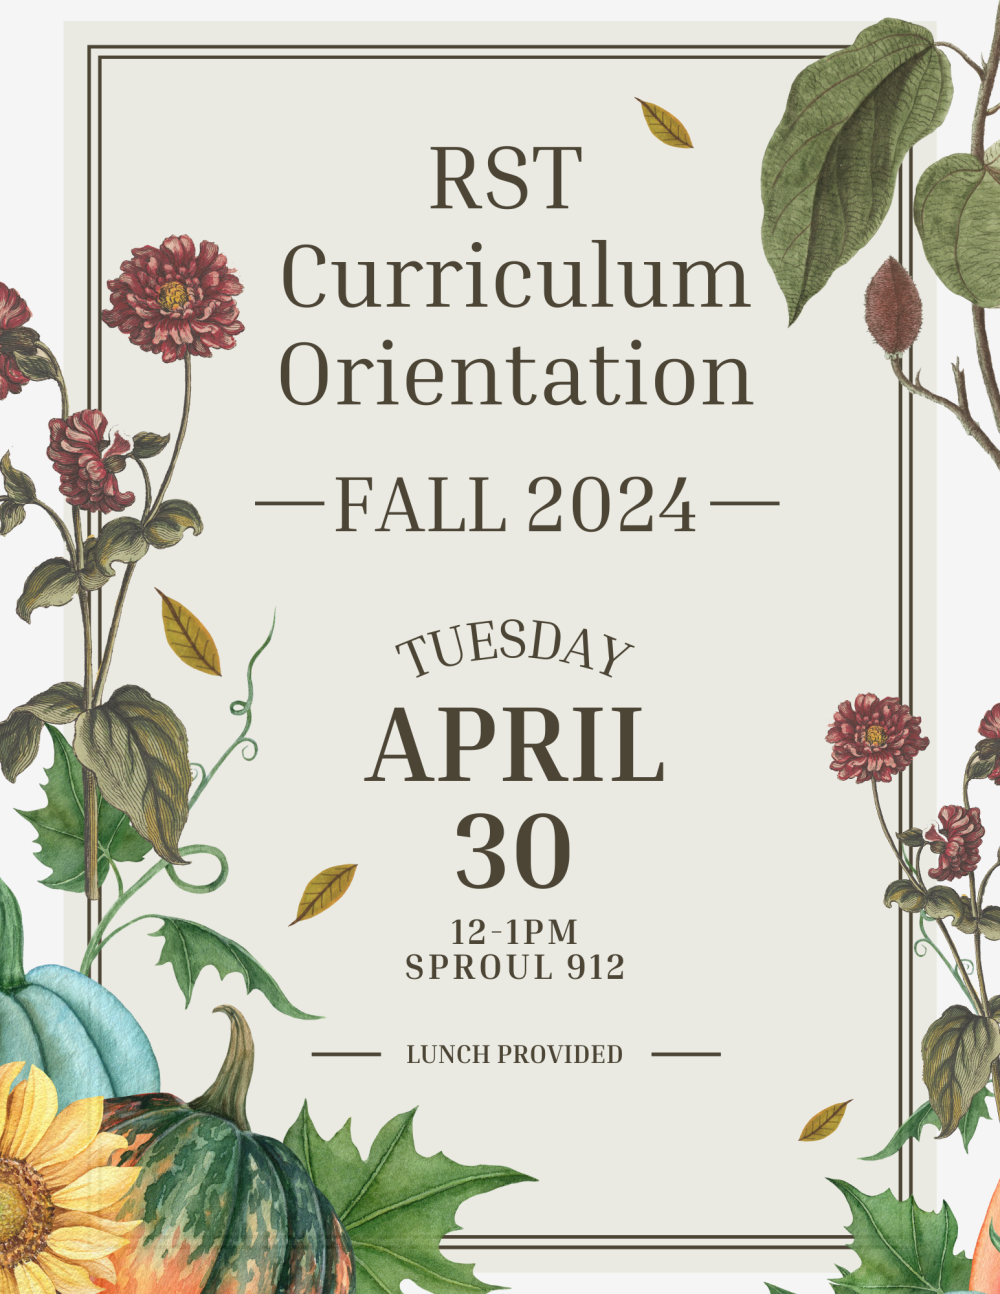 A flyer for the upcoming event, the text surrounded by ornate flowers